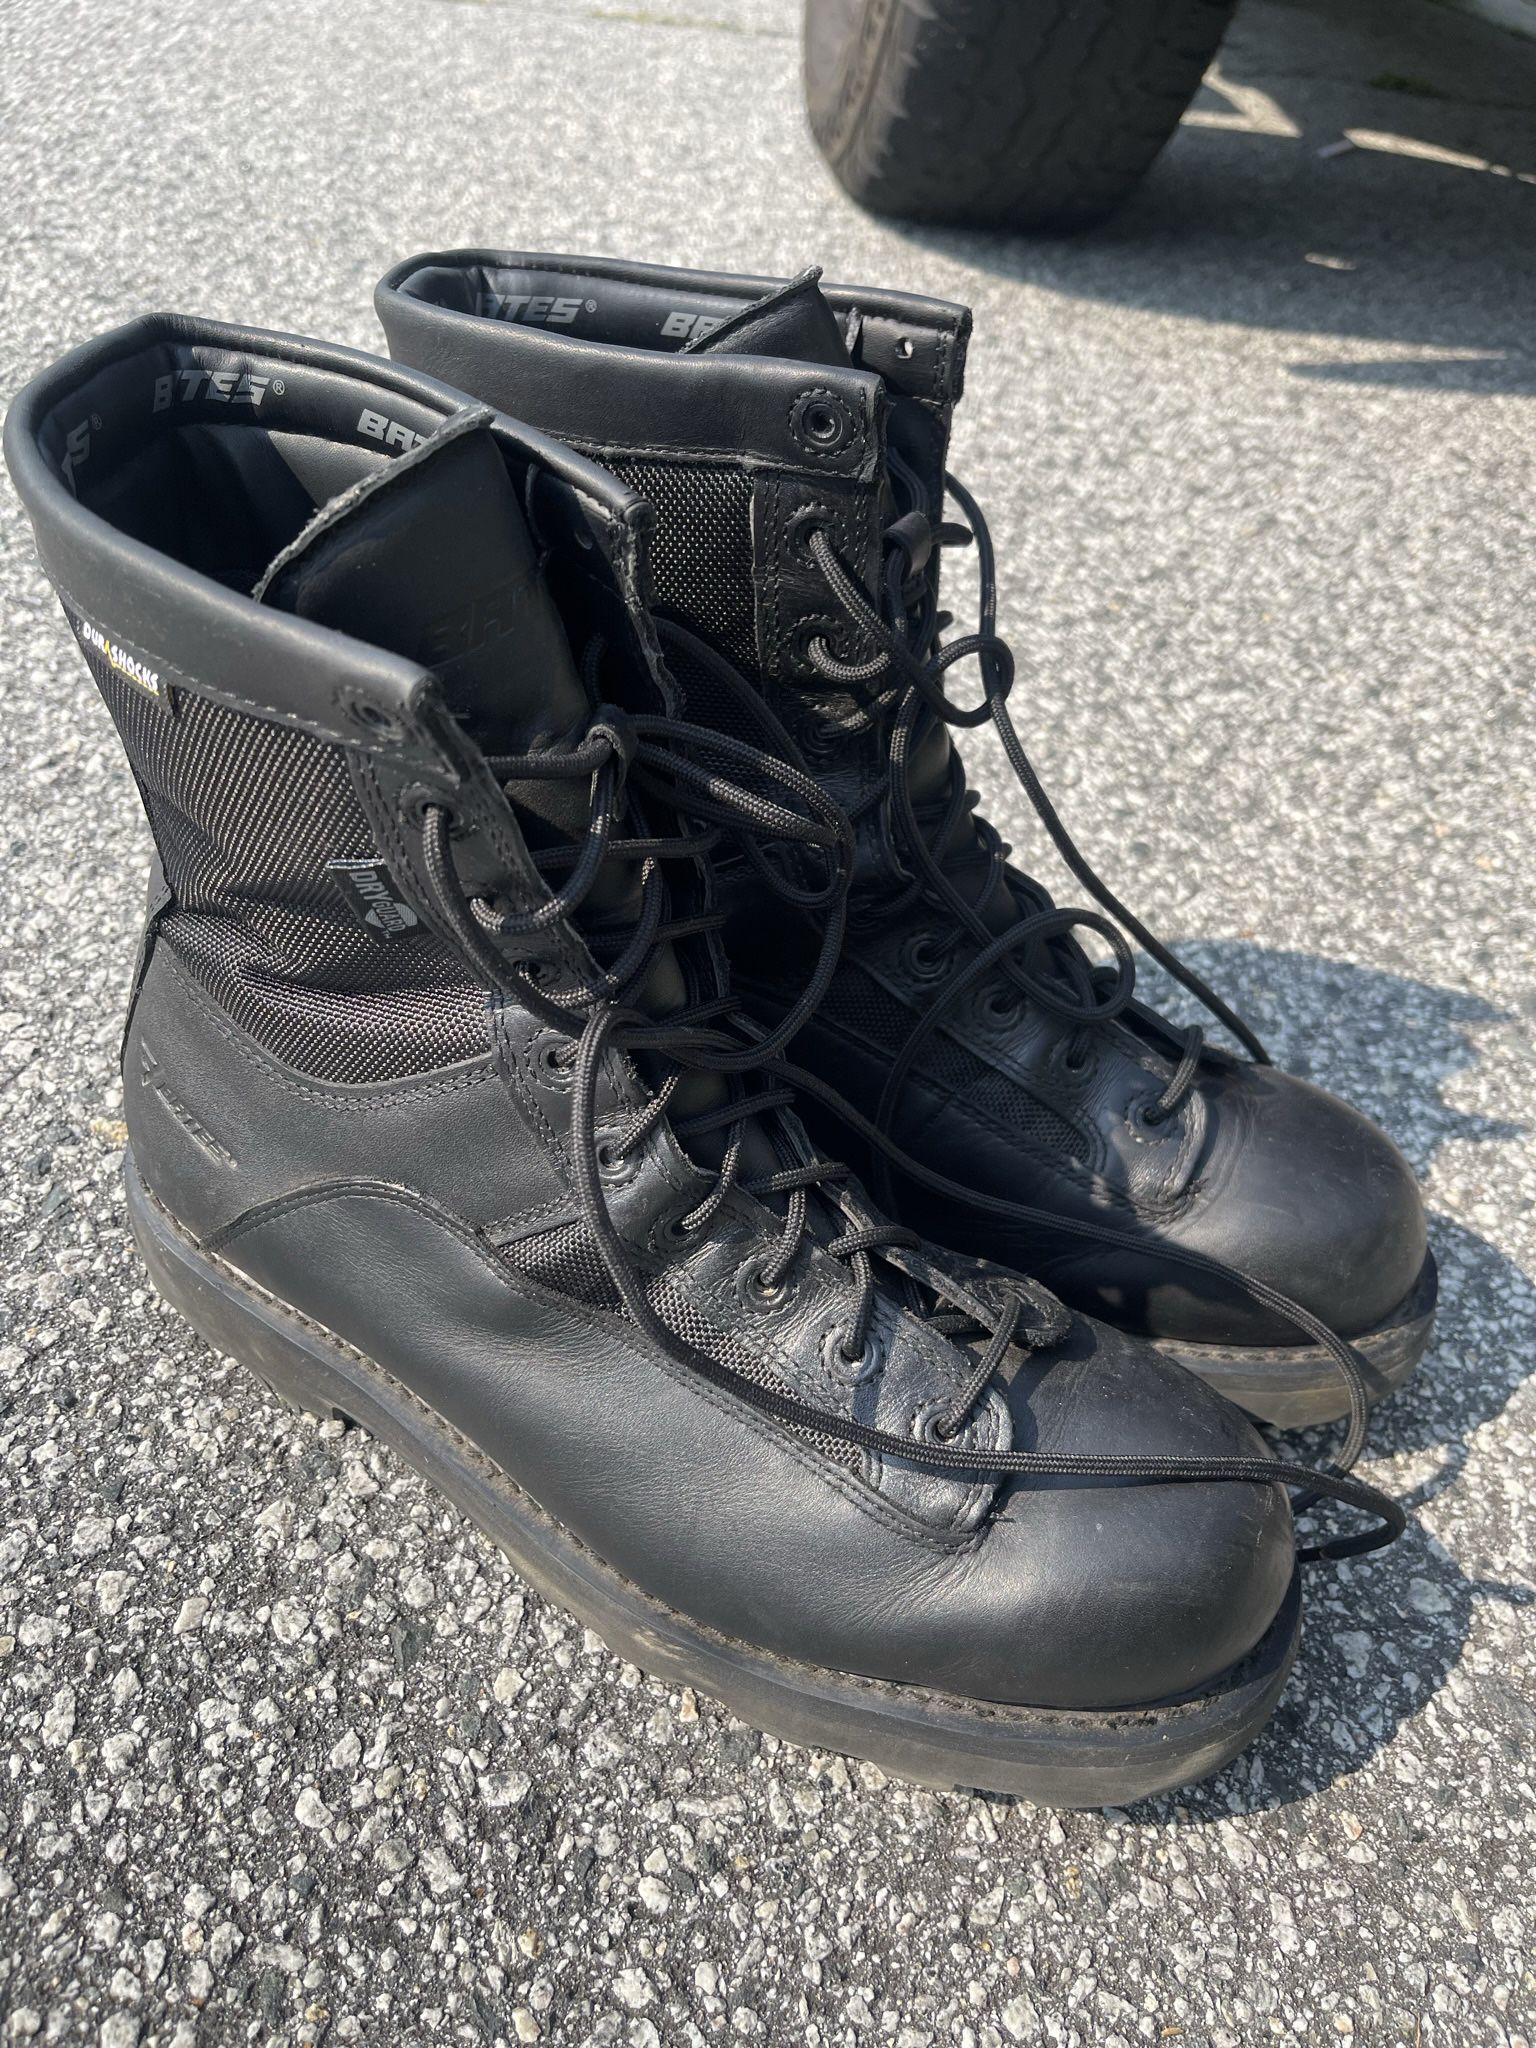 Size 12 Work Boots (worth $100+)